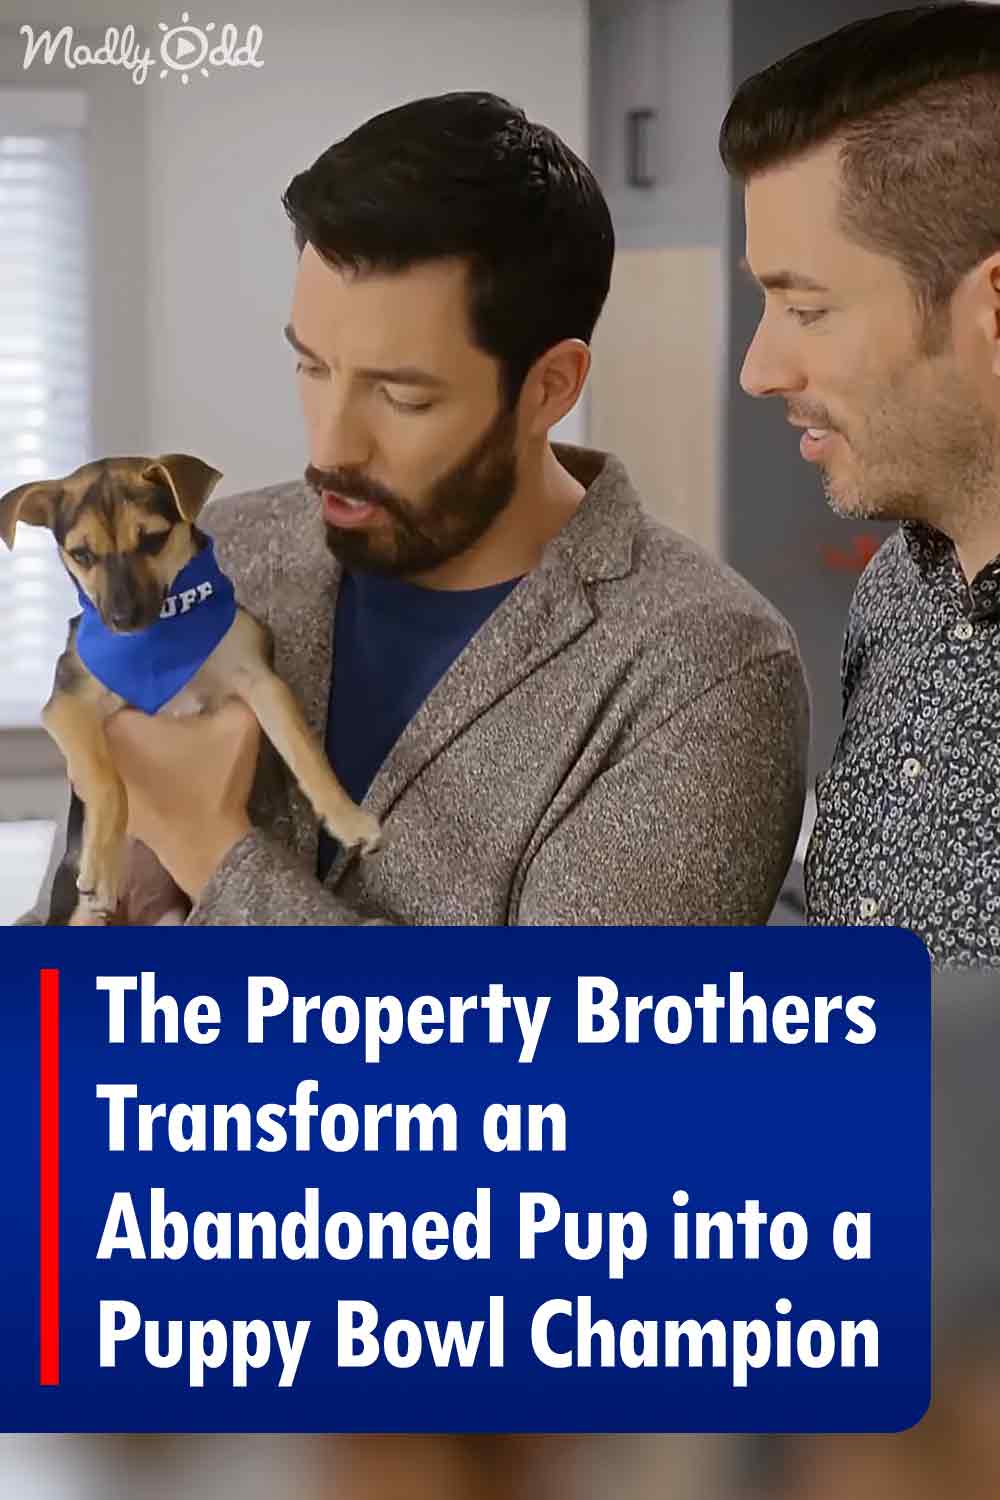 The Property Brothers Transform an Abandoned Pup into a Puppy Bowl Champion